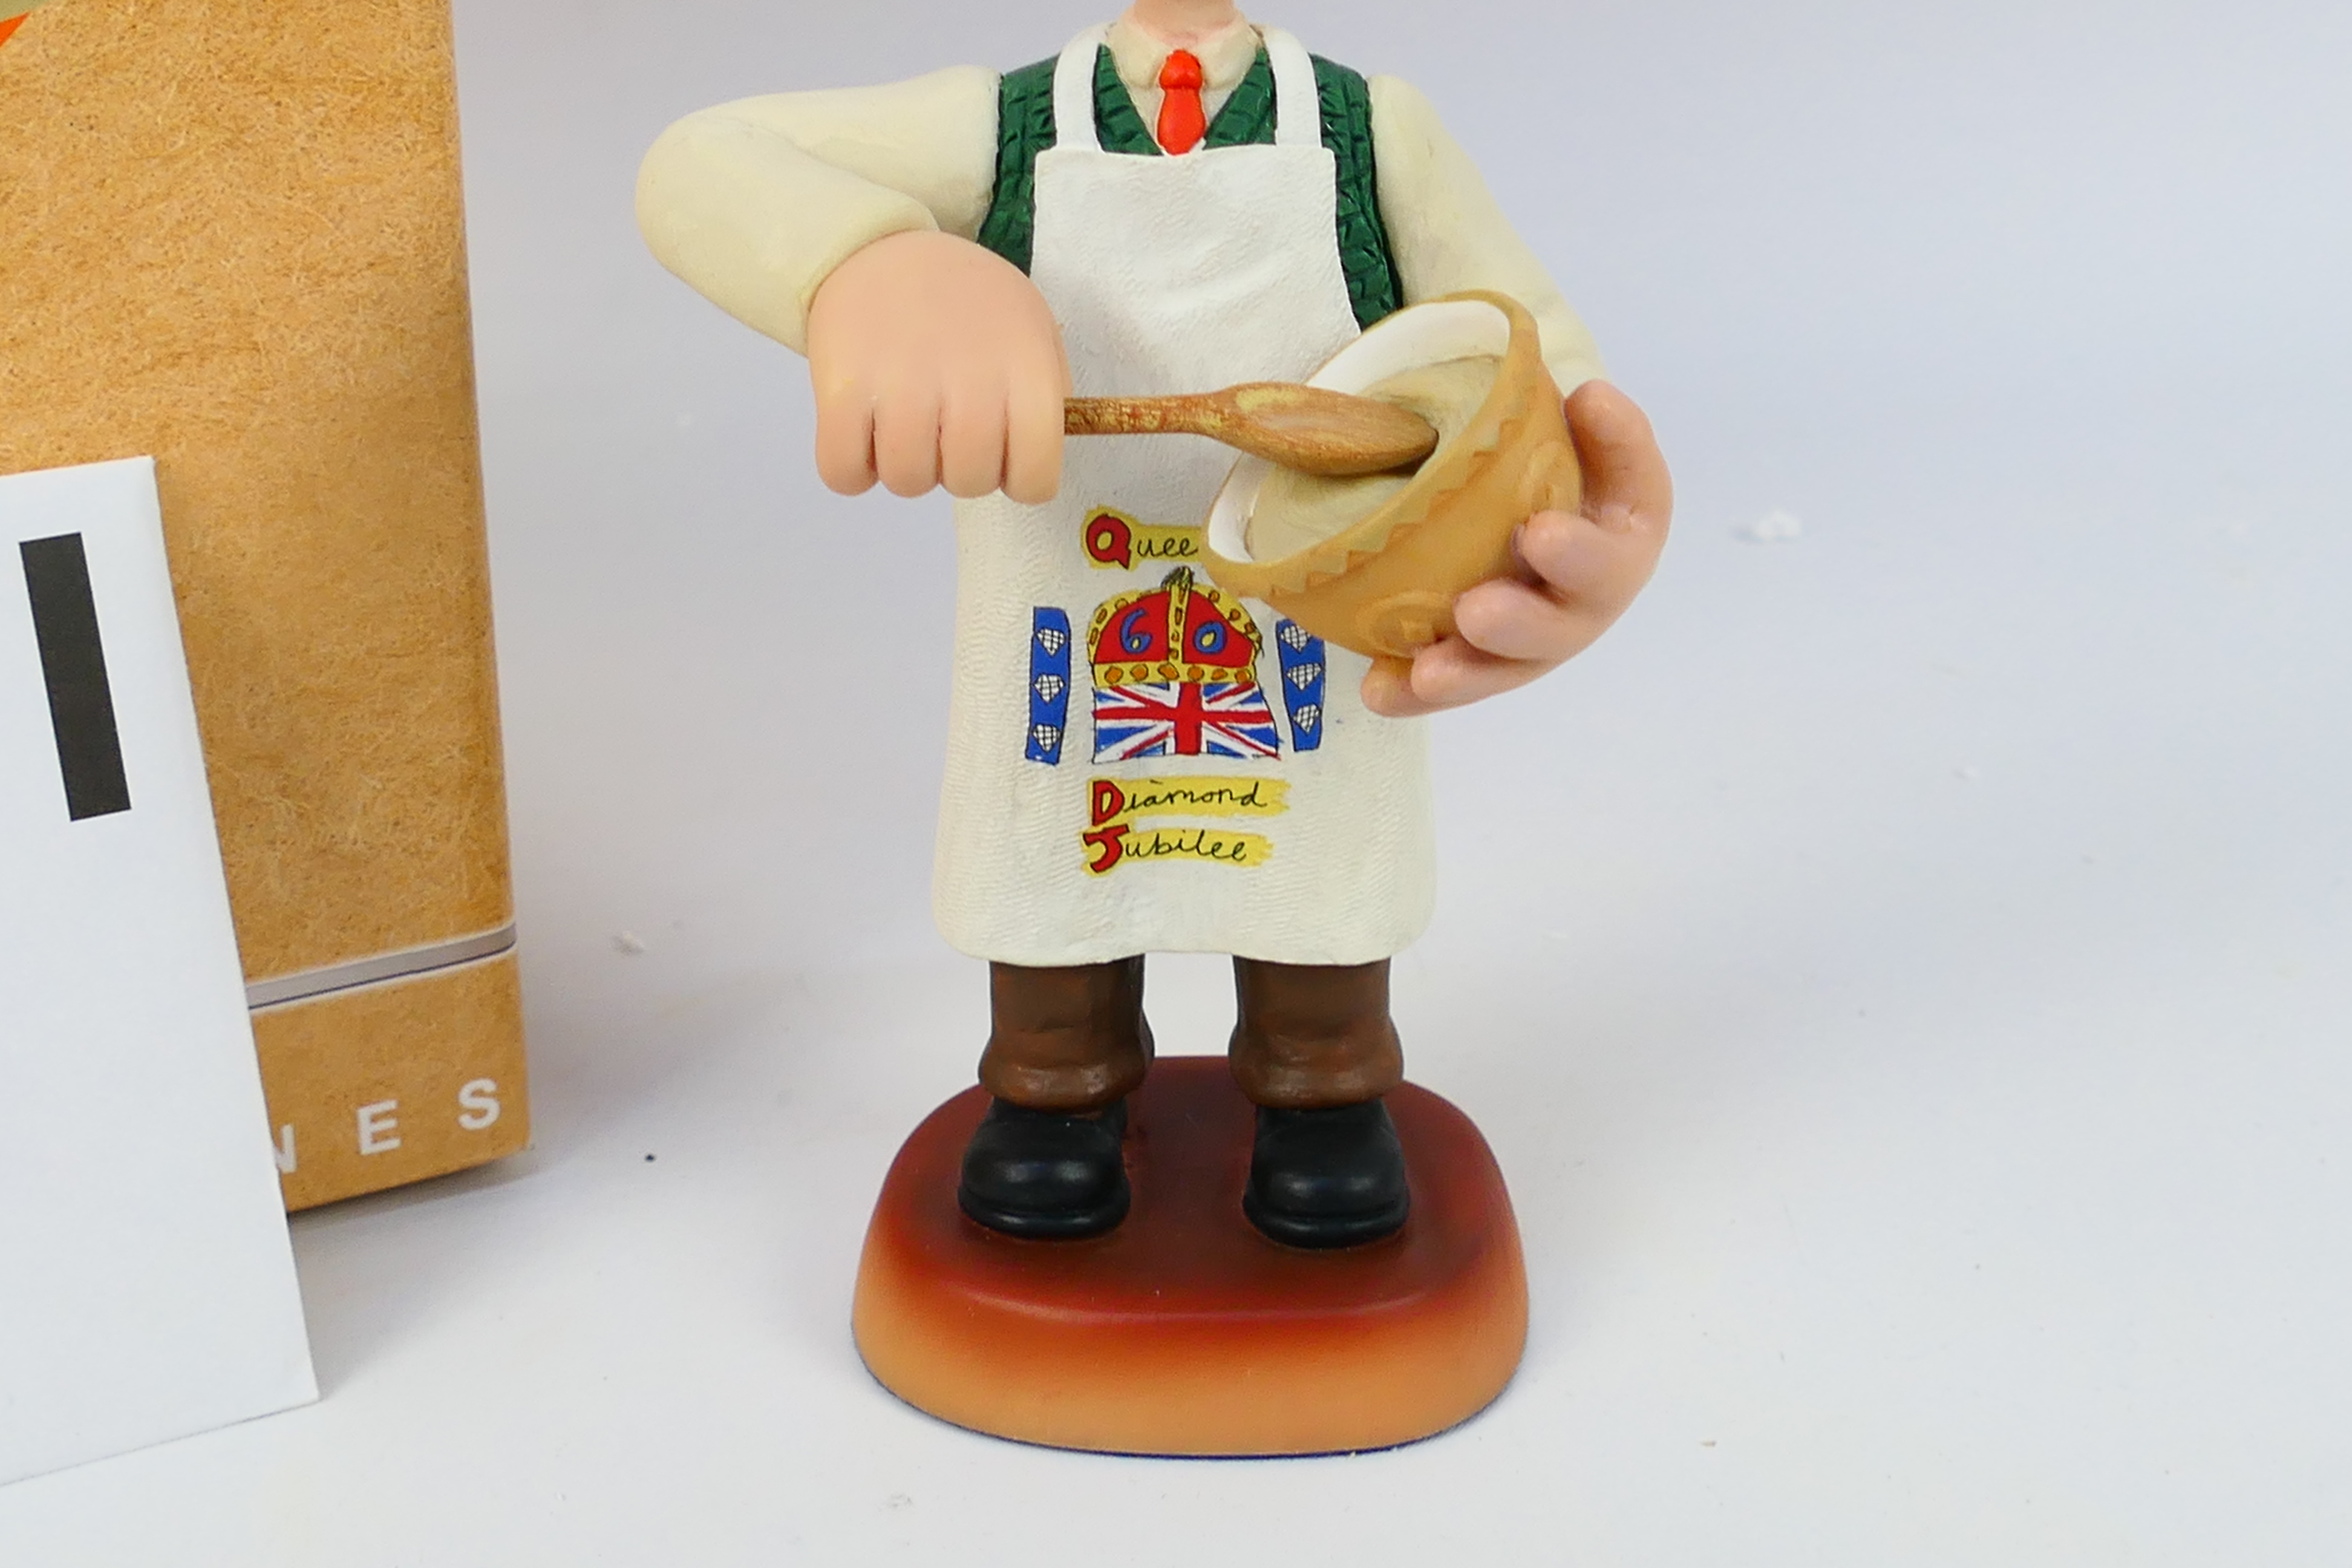 Robert Harrop - Wallace and Gromit - A Limited Edition Robert Harrop resin figure of Wallace - Image 4 of 7